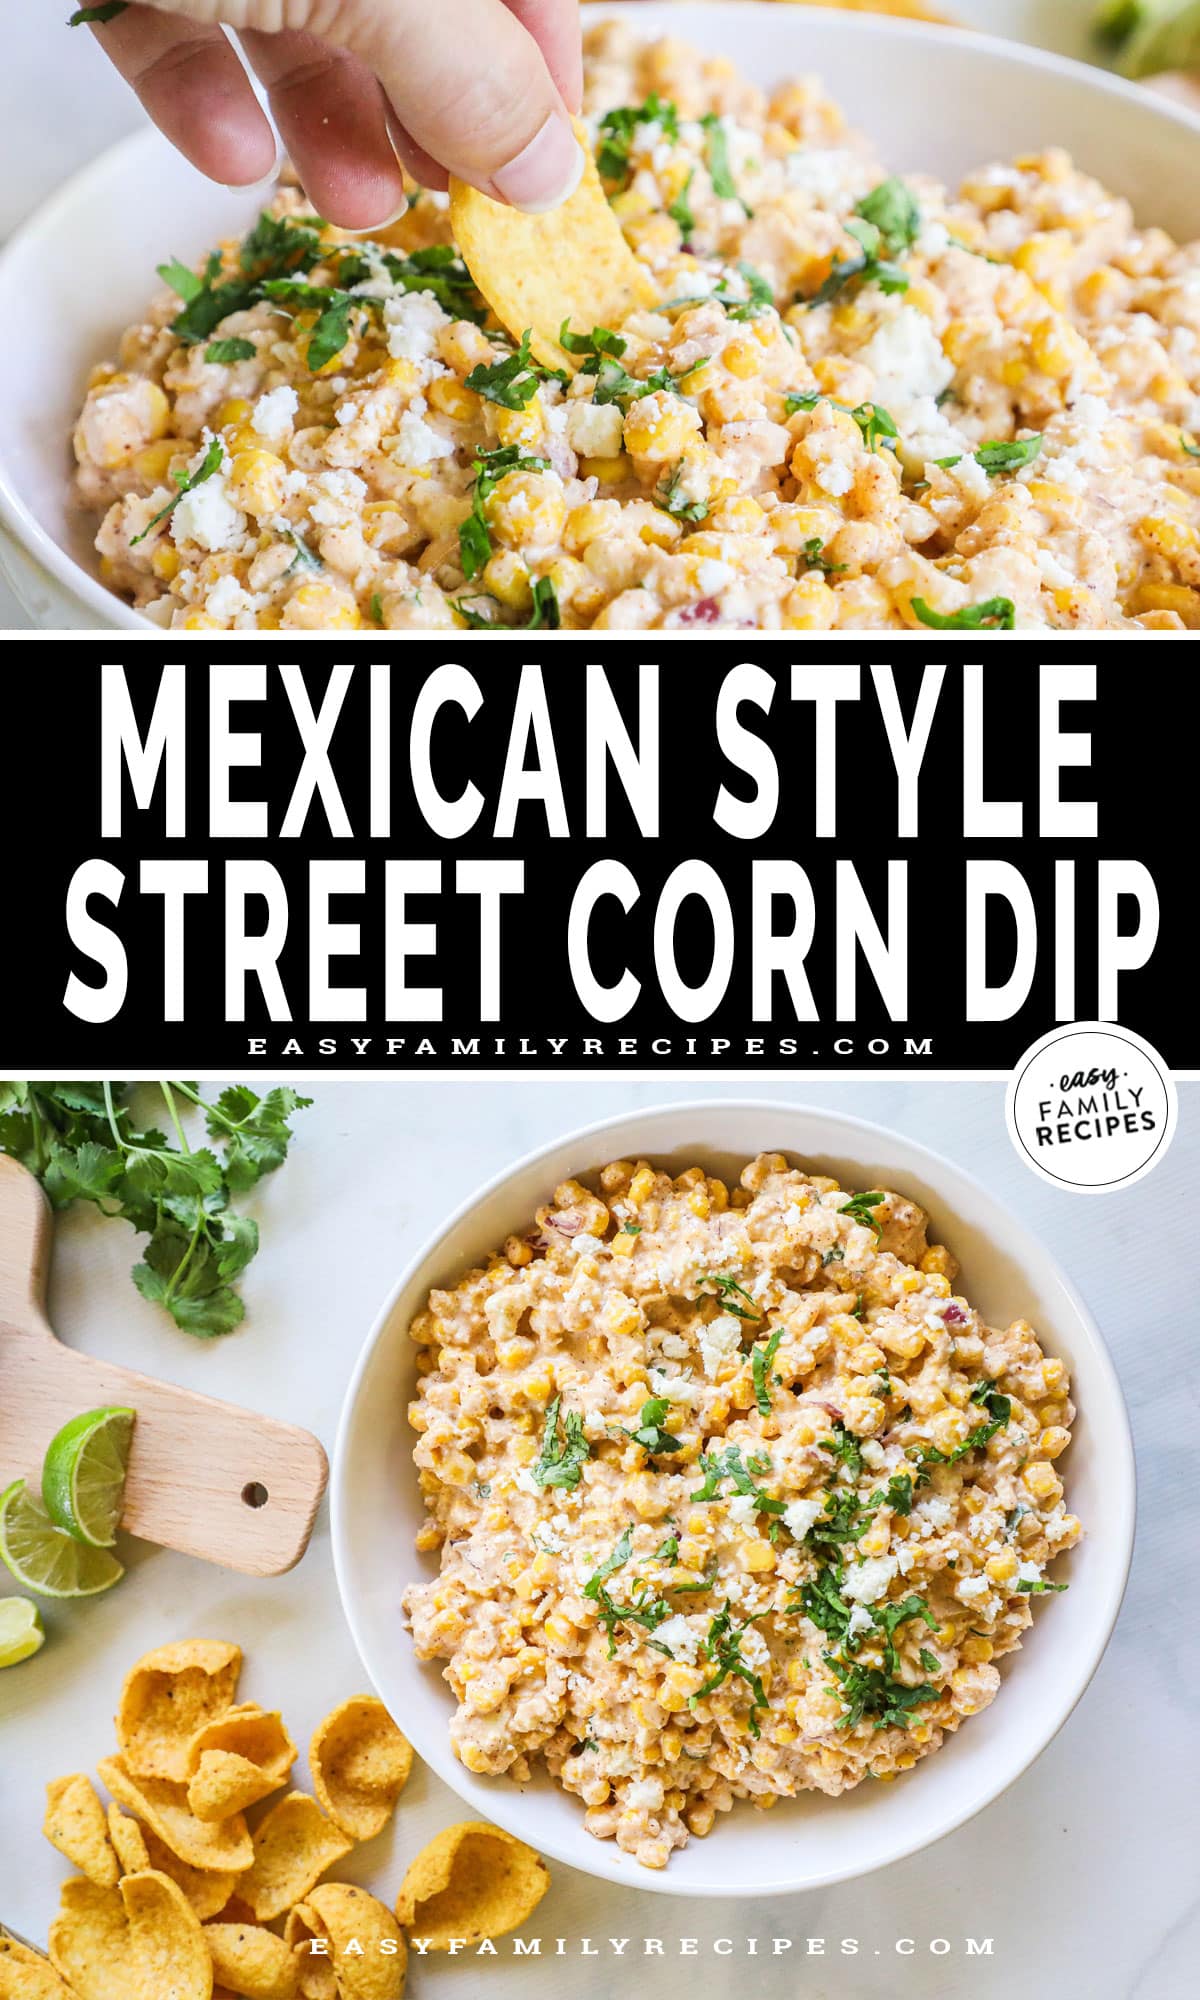 2 image featured image collage with the top showing a hand dipping a chip into the mexican style stree corn dip and the bottom of just the dip.